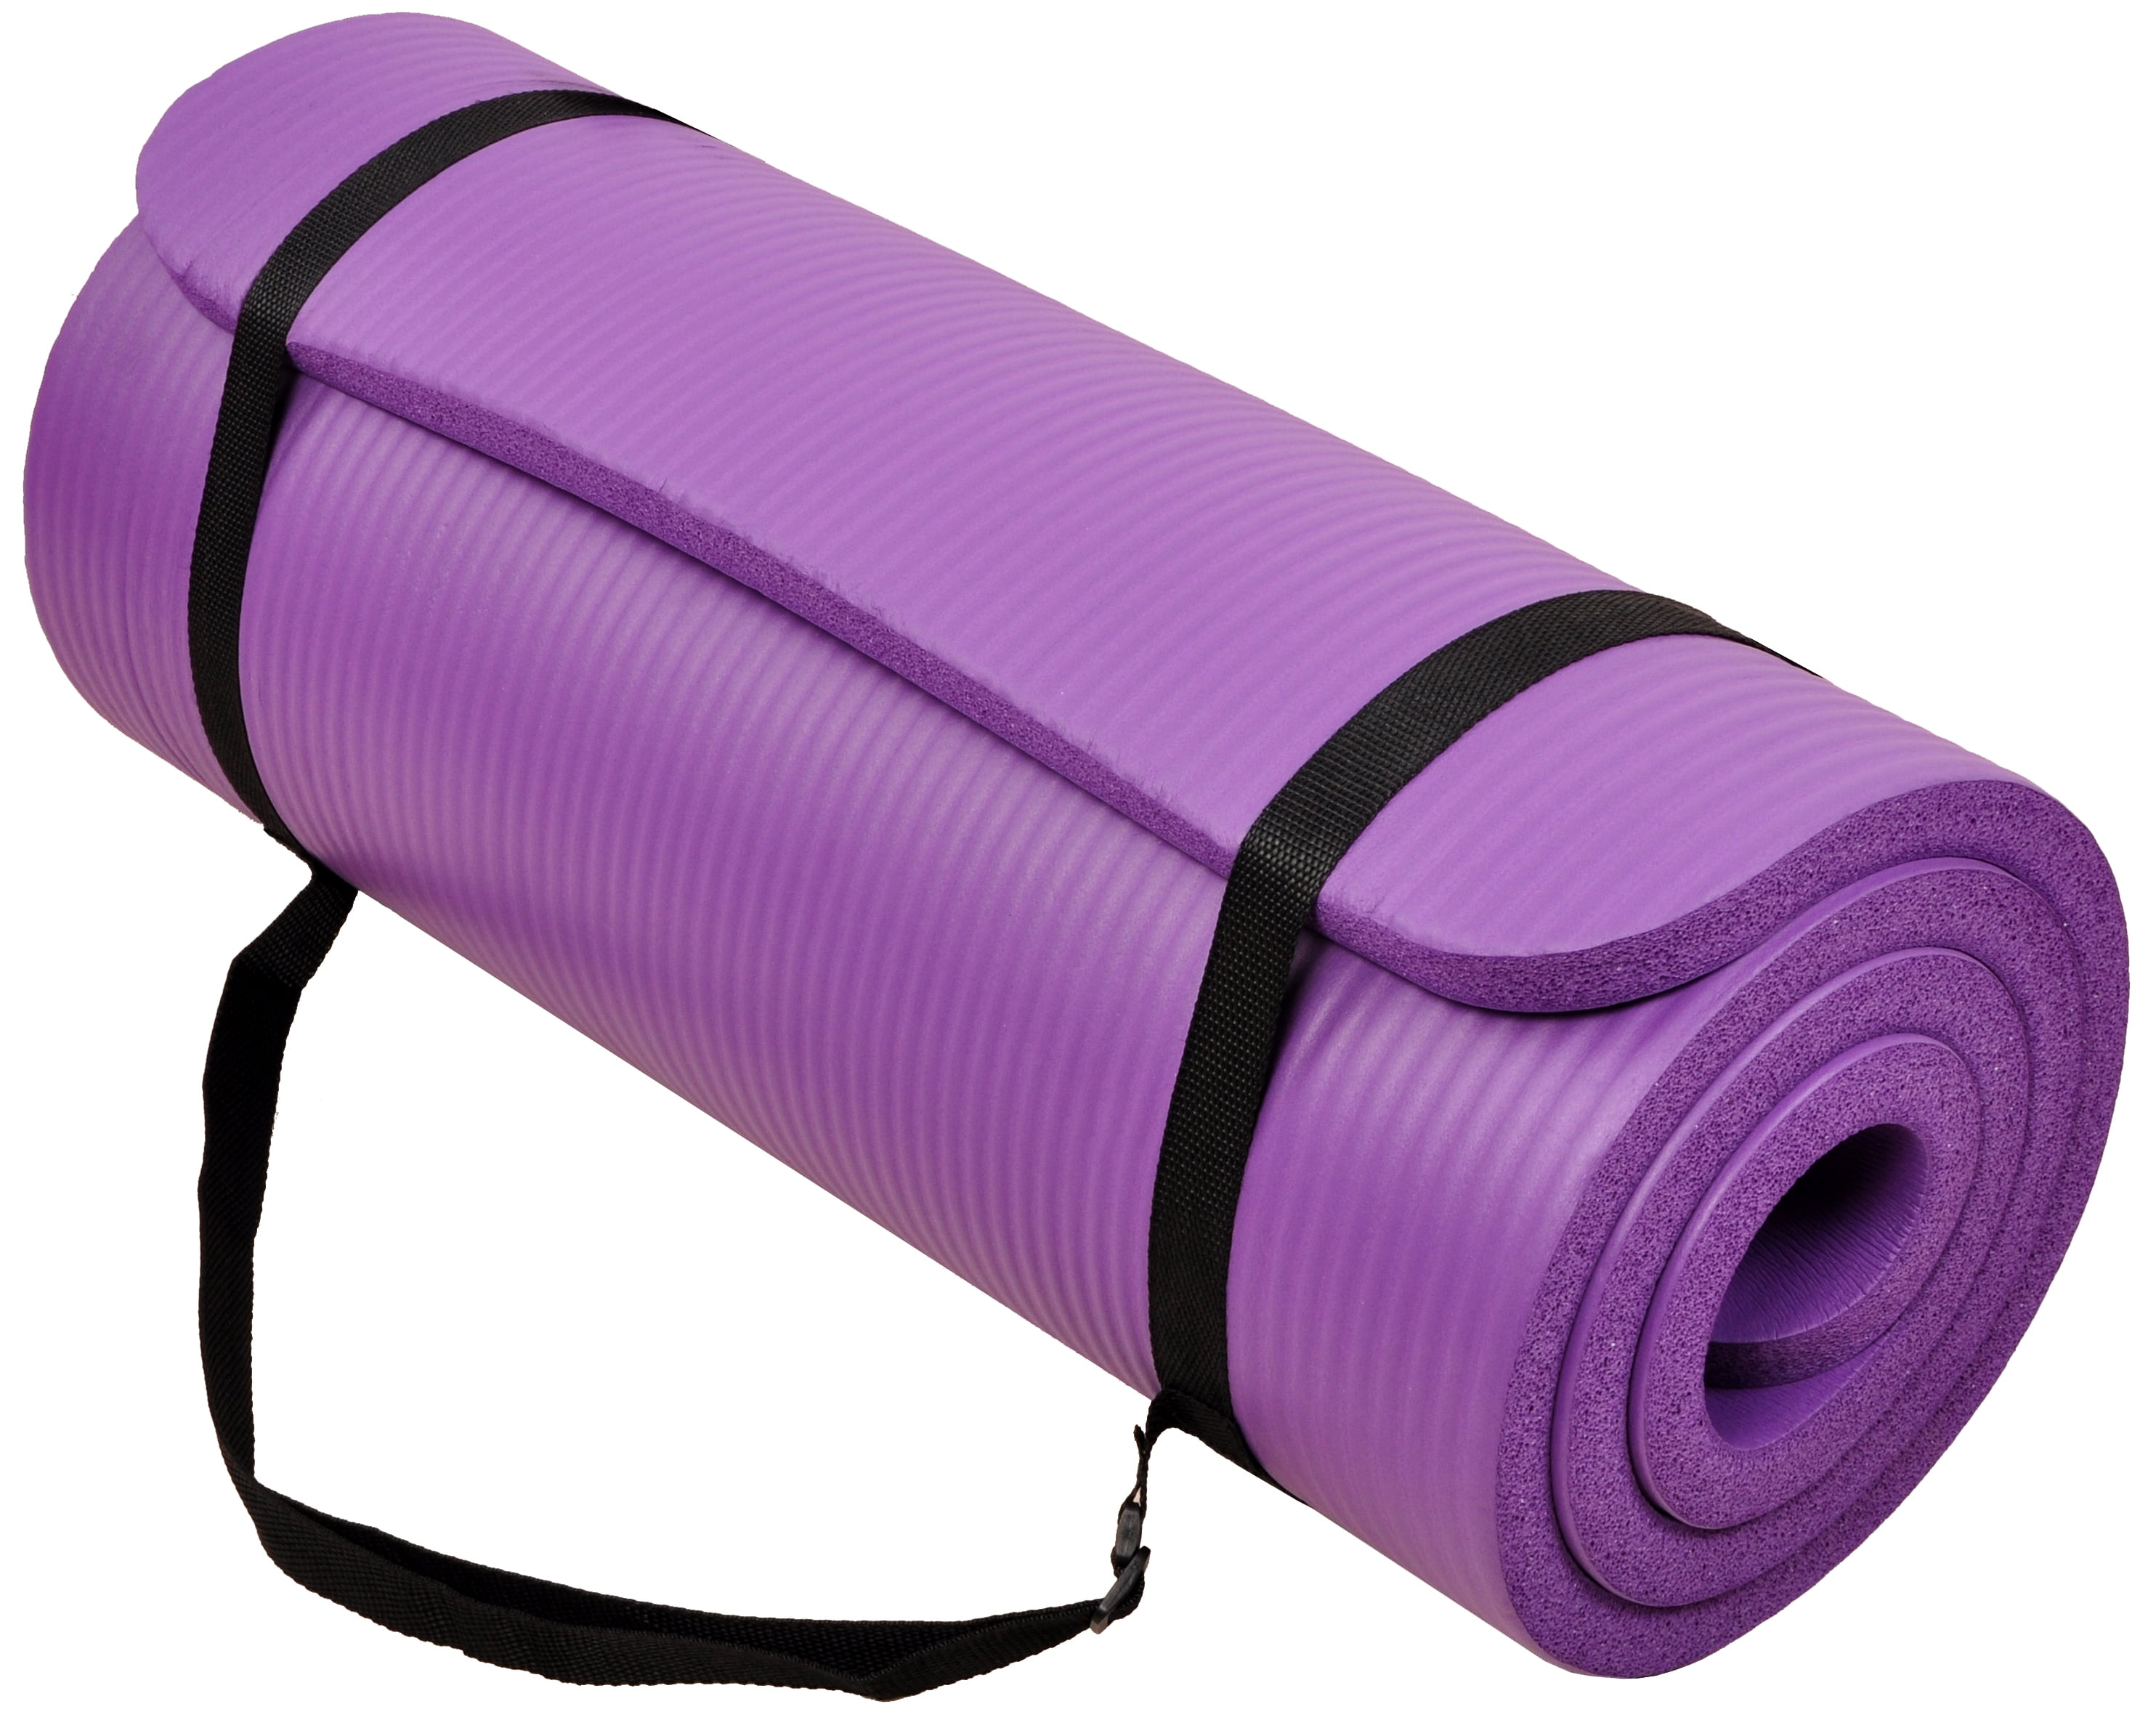 Yoga Mat 72" X 24" Extra Thick Exercise Mat Pilates Pad w/Carrying Strap&Net Bag 